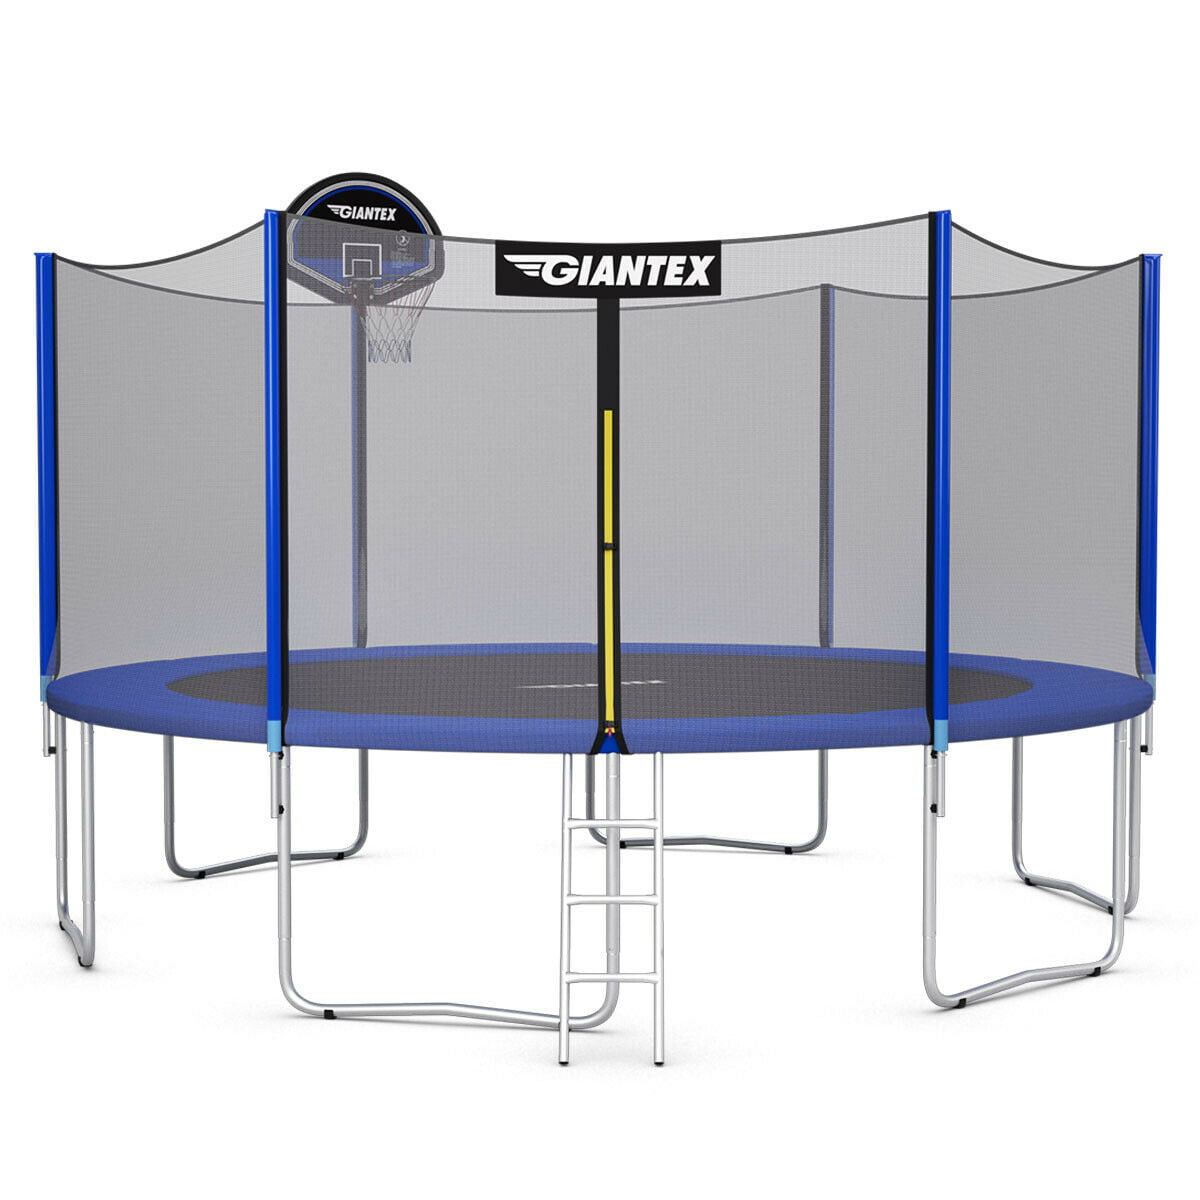 Topbuy 15 Feet Trampoline Combo Bounce Jump Safety Enclosure Net With Basketball Hoop Ladder